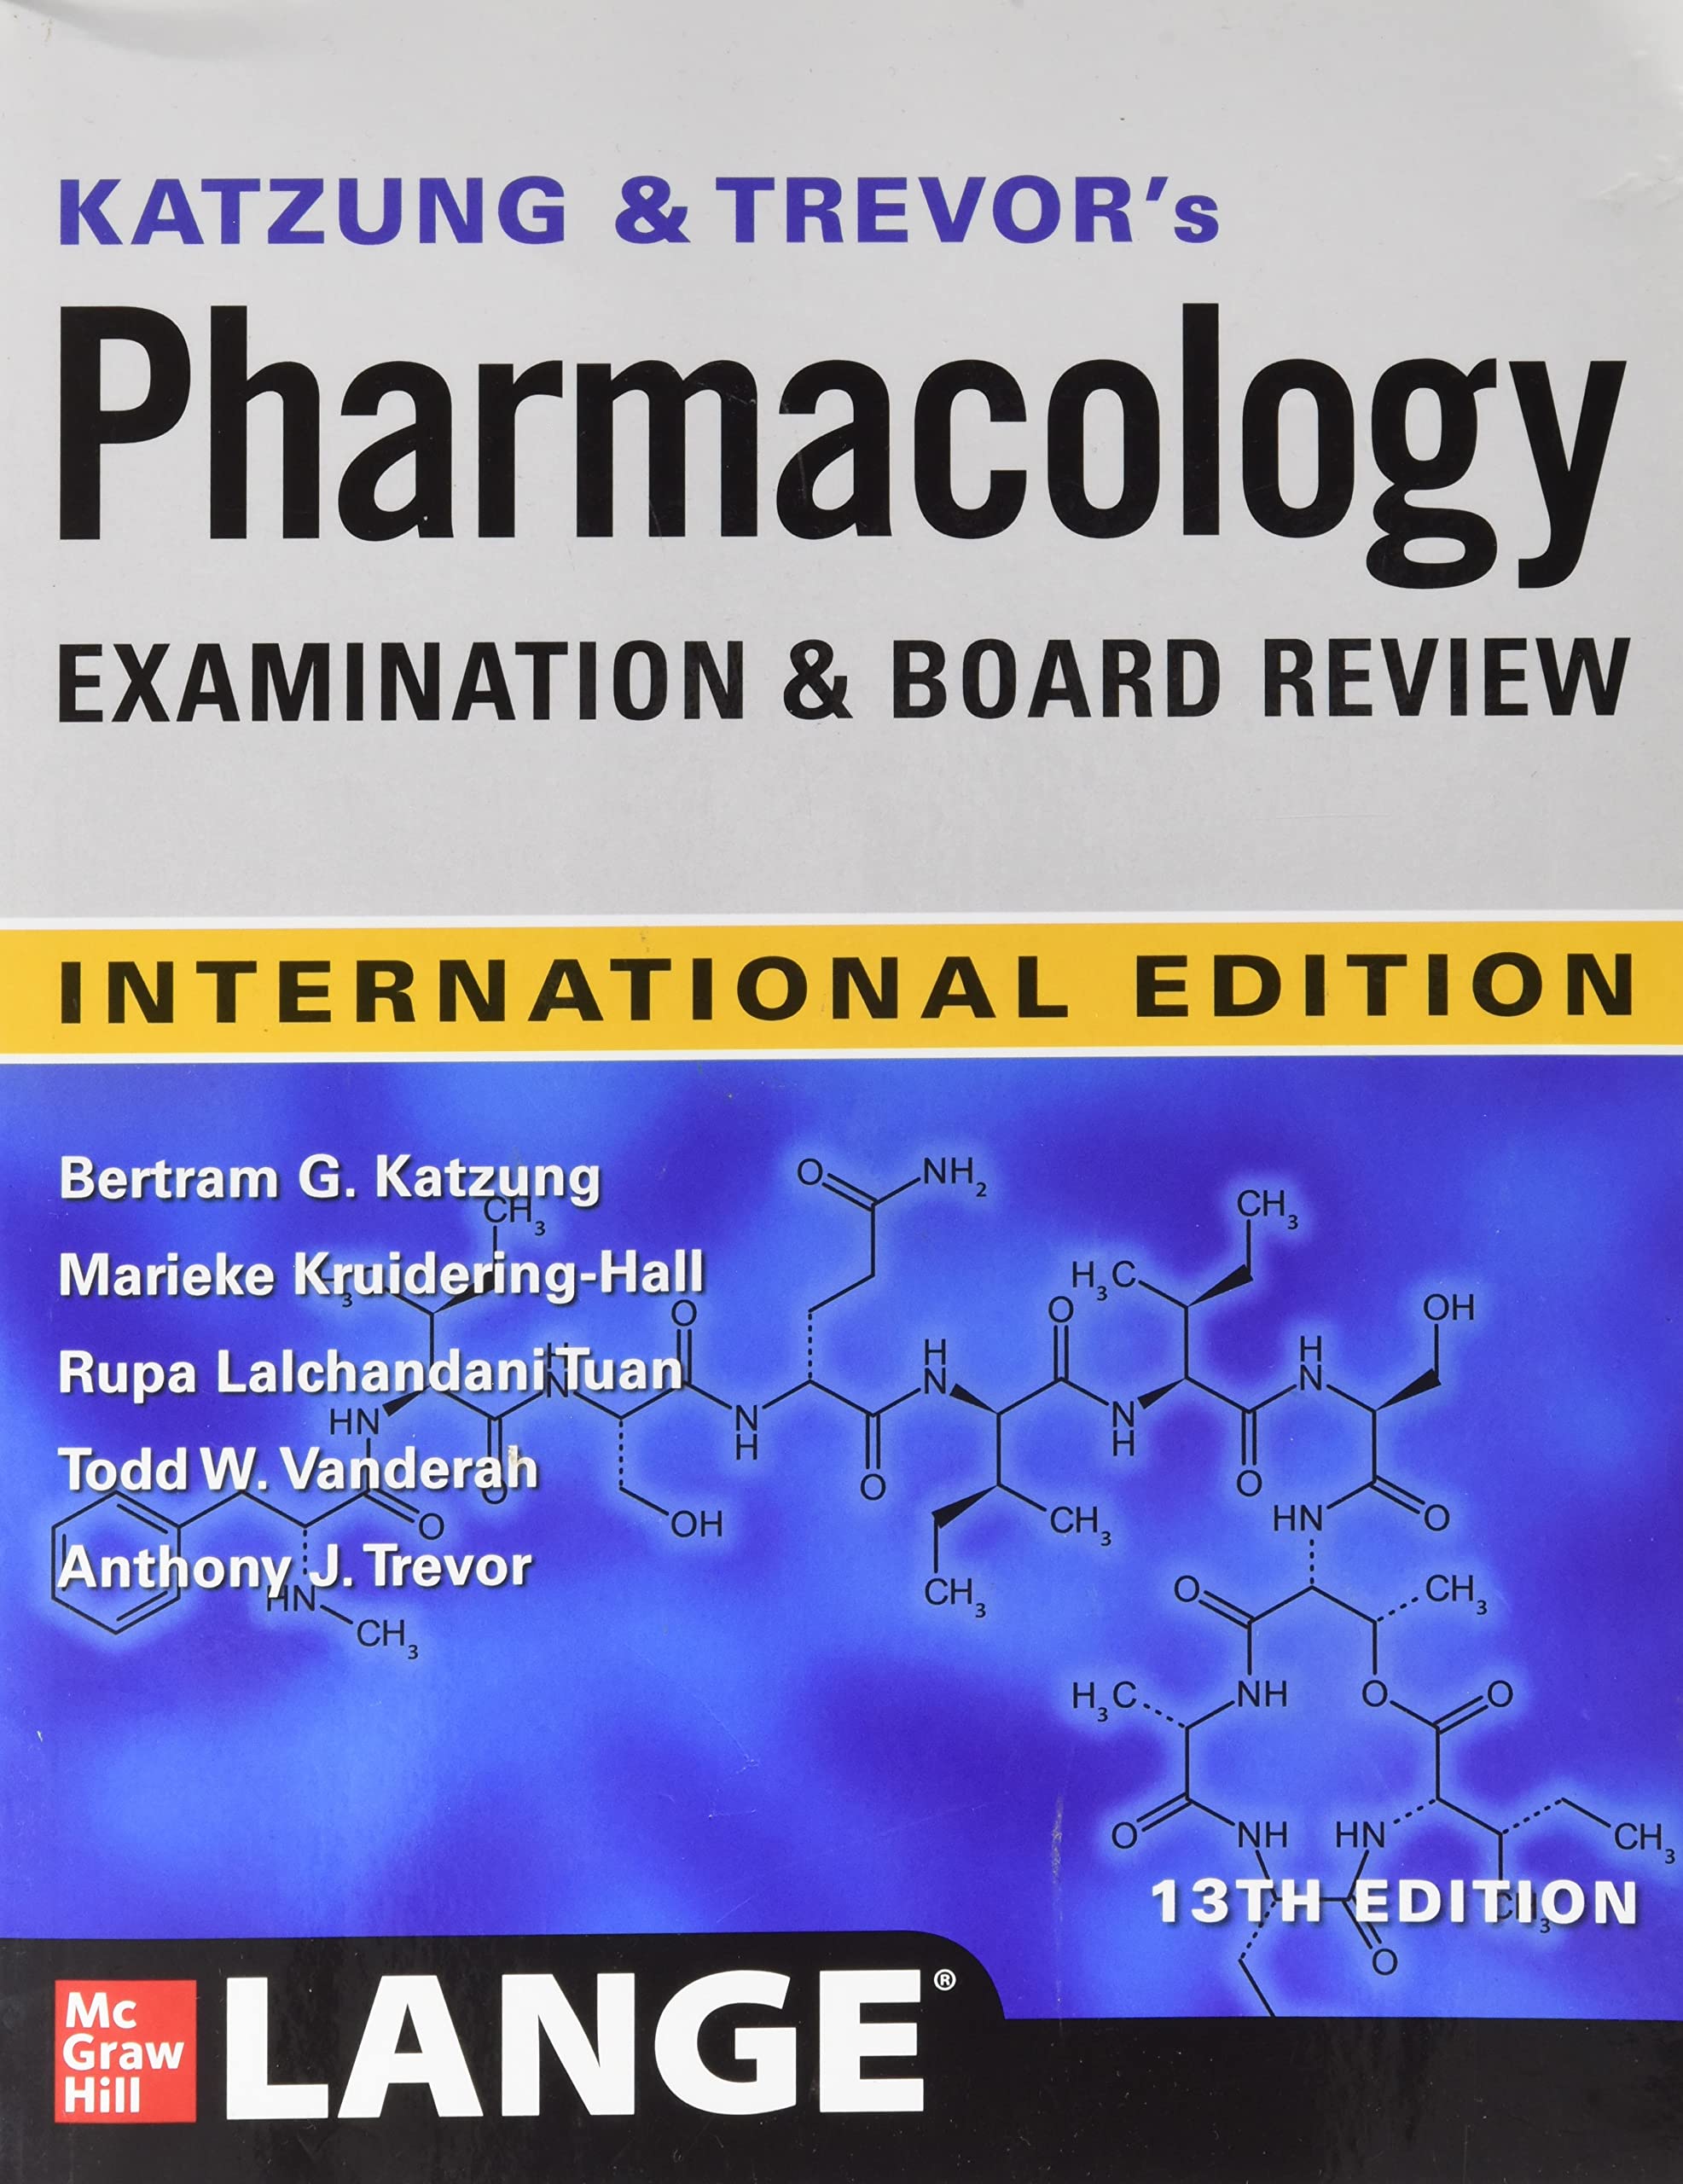 [PDF] Download Katzung & Trevor’s Pharmacology Examination and Board Review Book in pdf